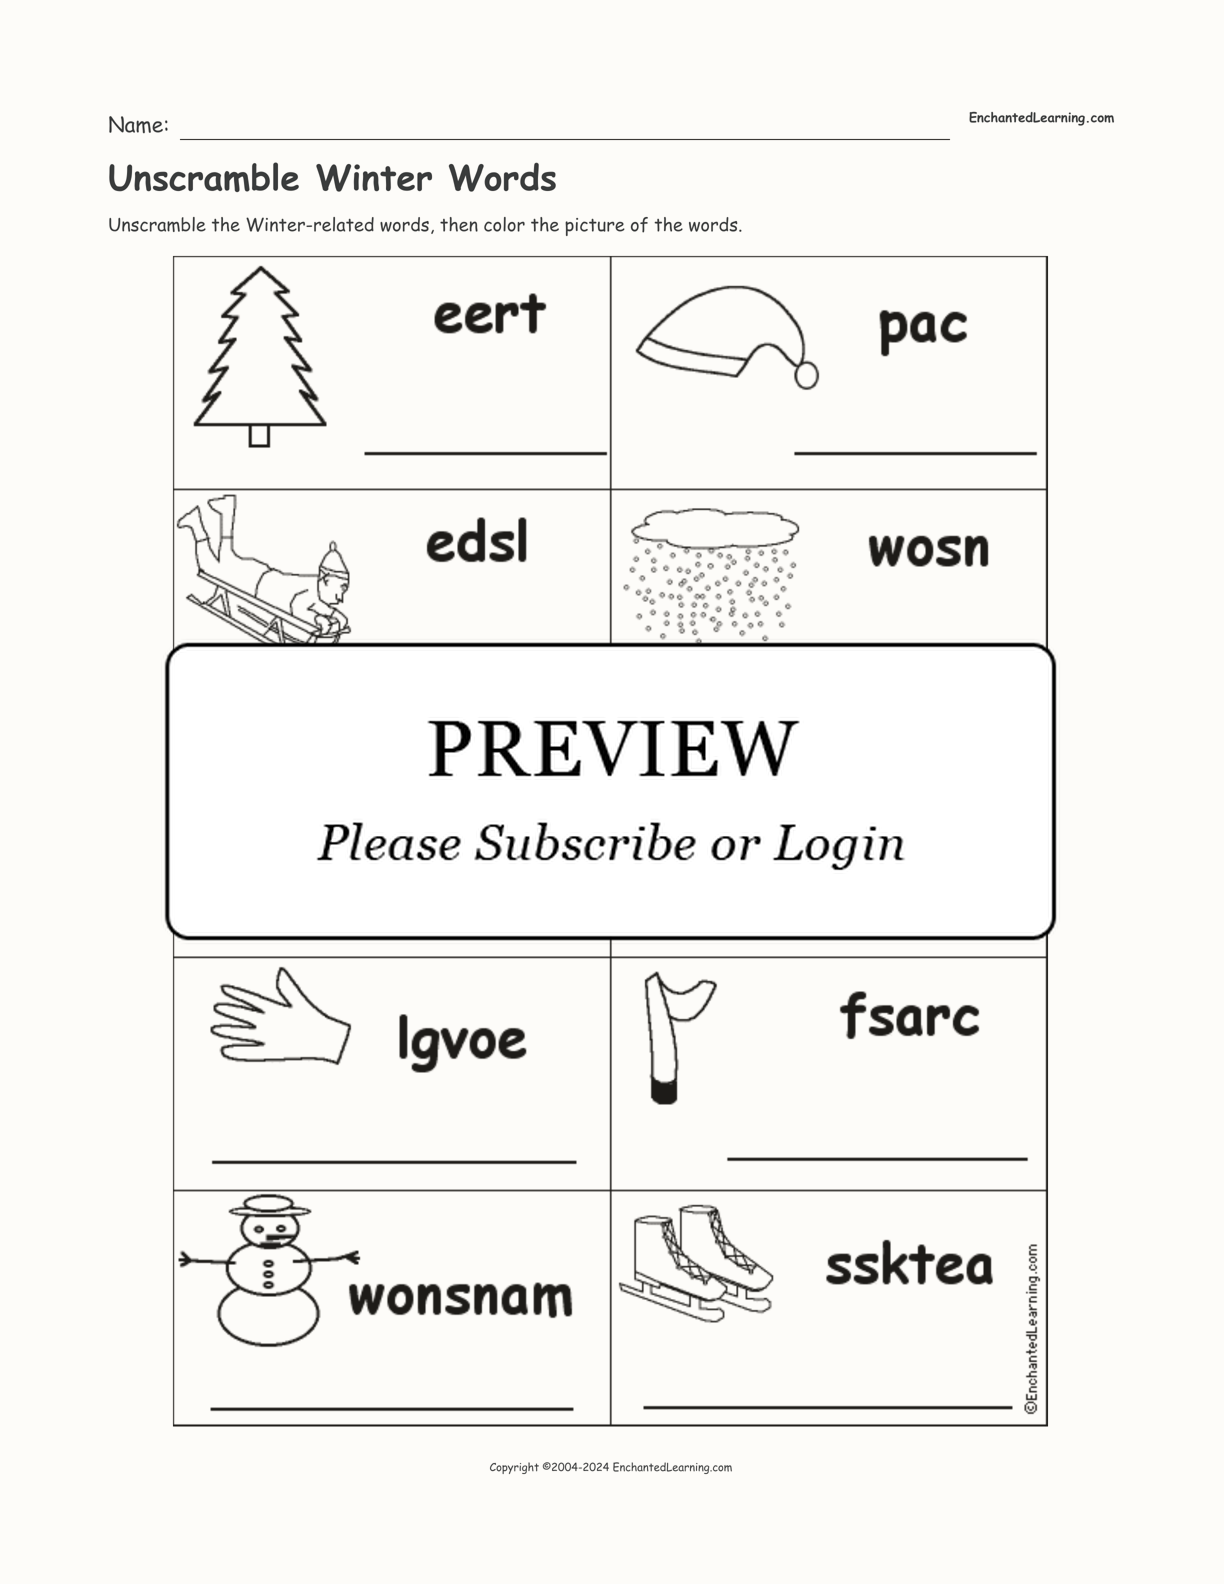 Unscramble Winter Words interactive worksheet page 1